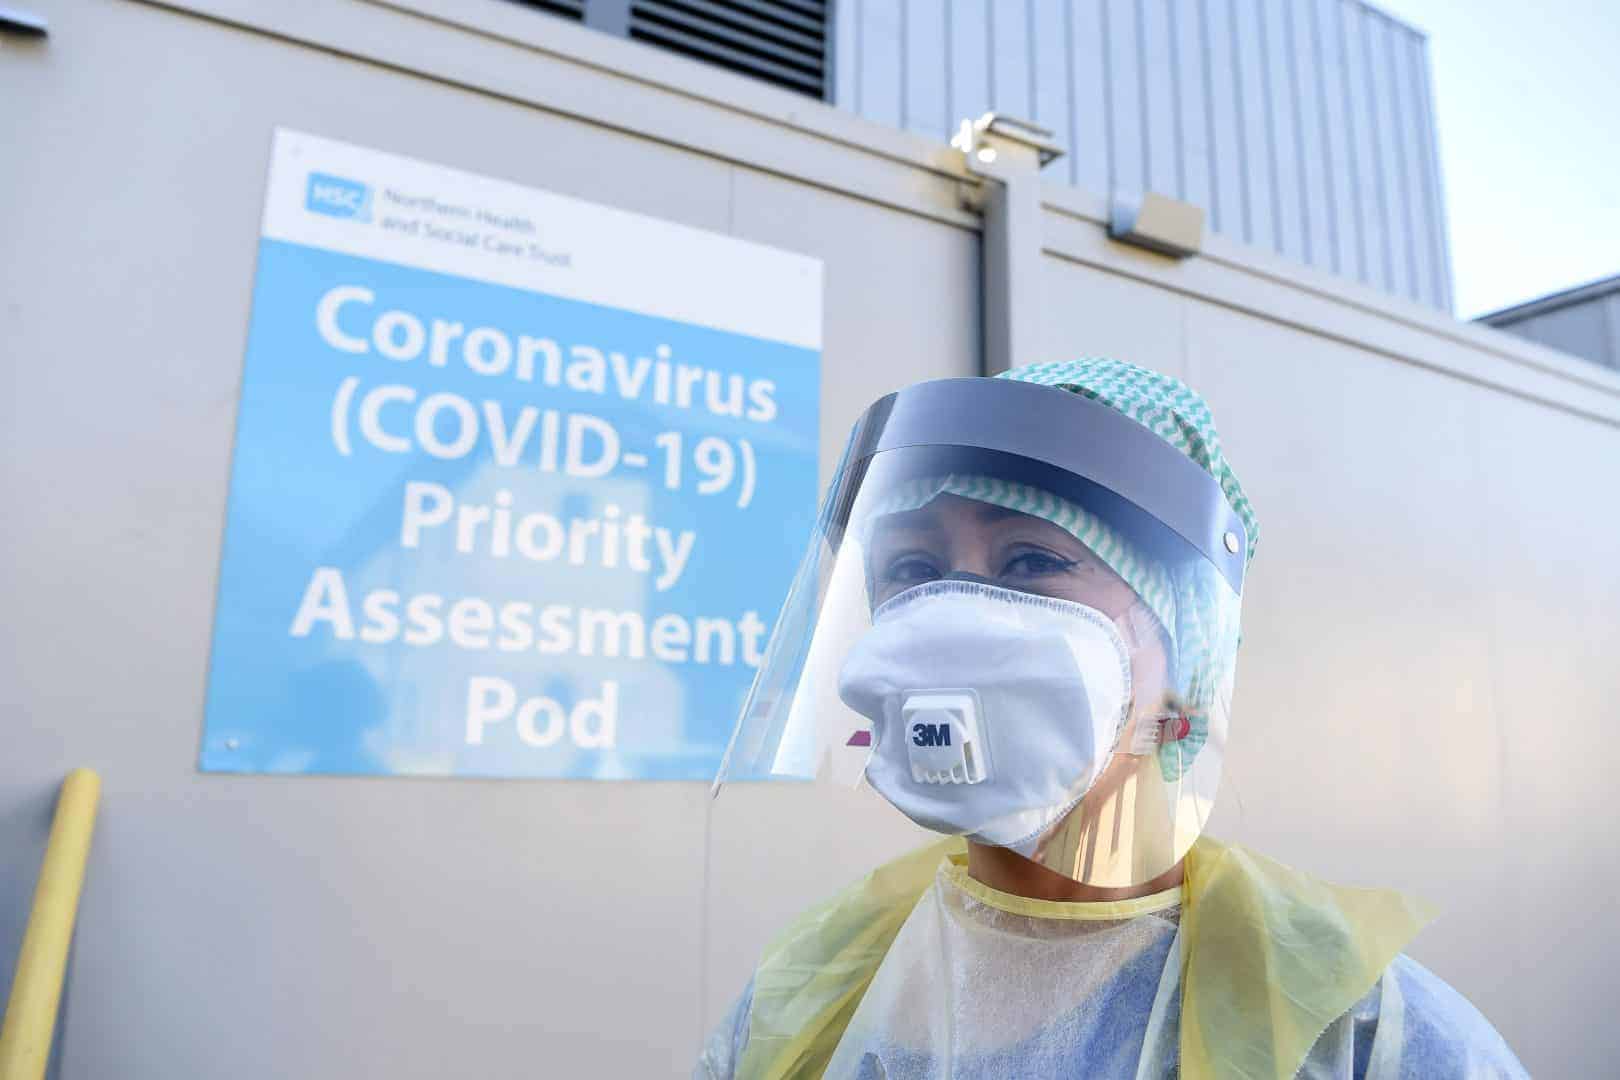 NHS workers in critical condition after contracting coronavirus as staff make plea for more protective kit